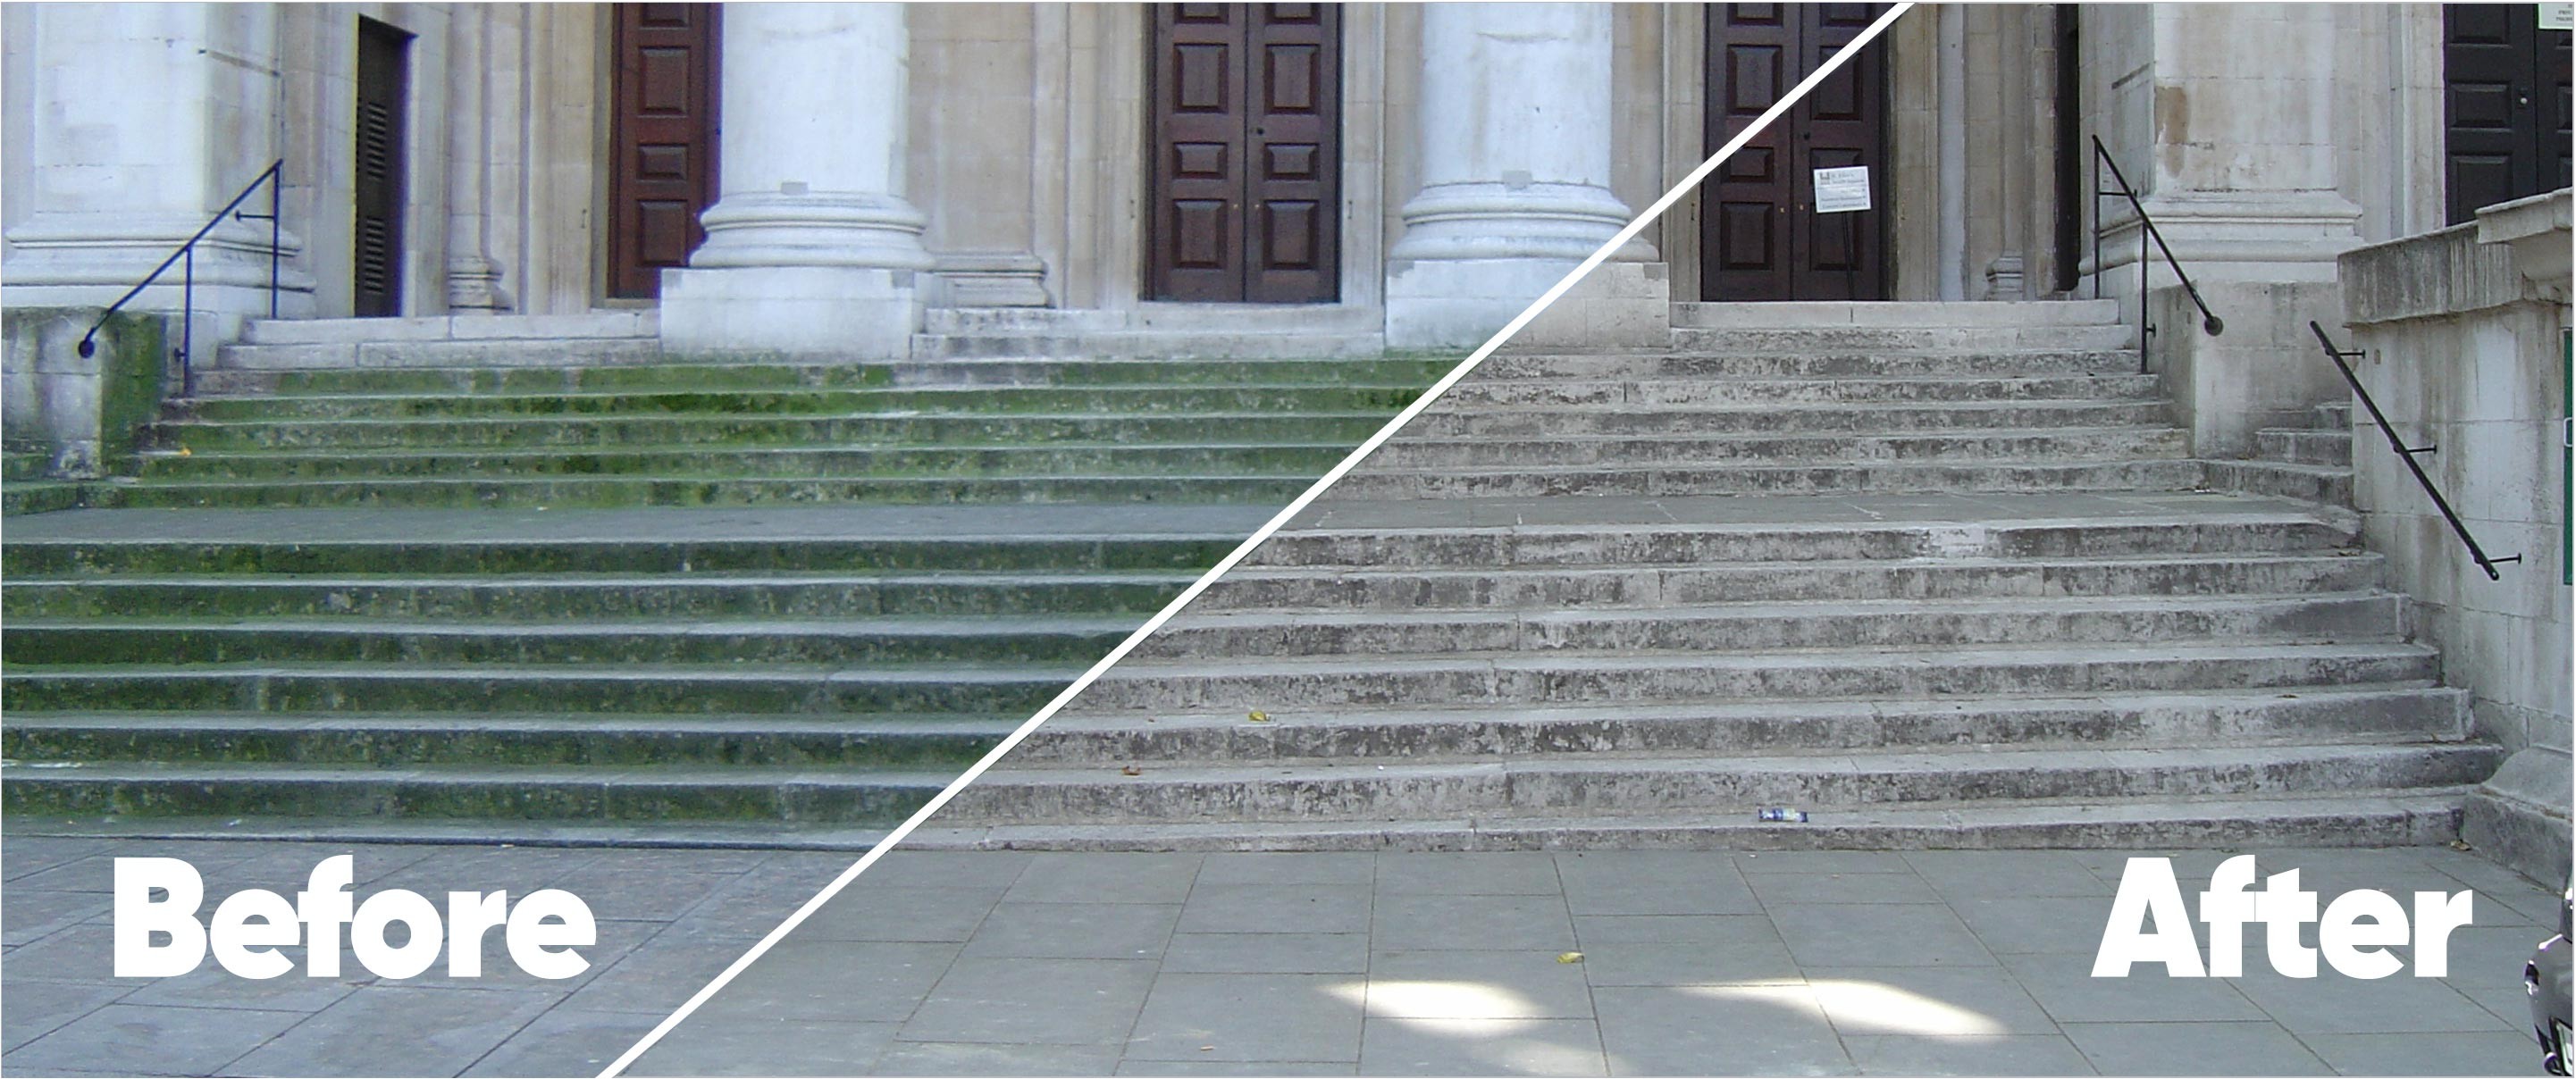 Before and after of steps different angle